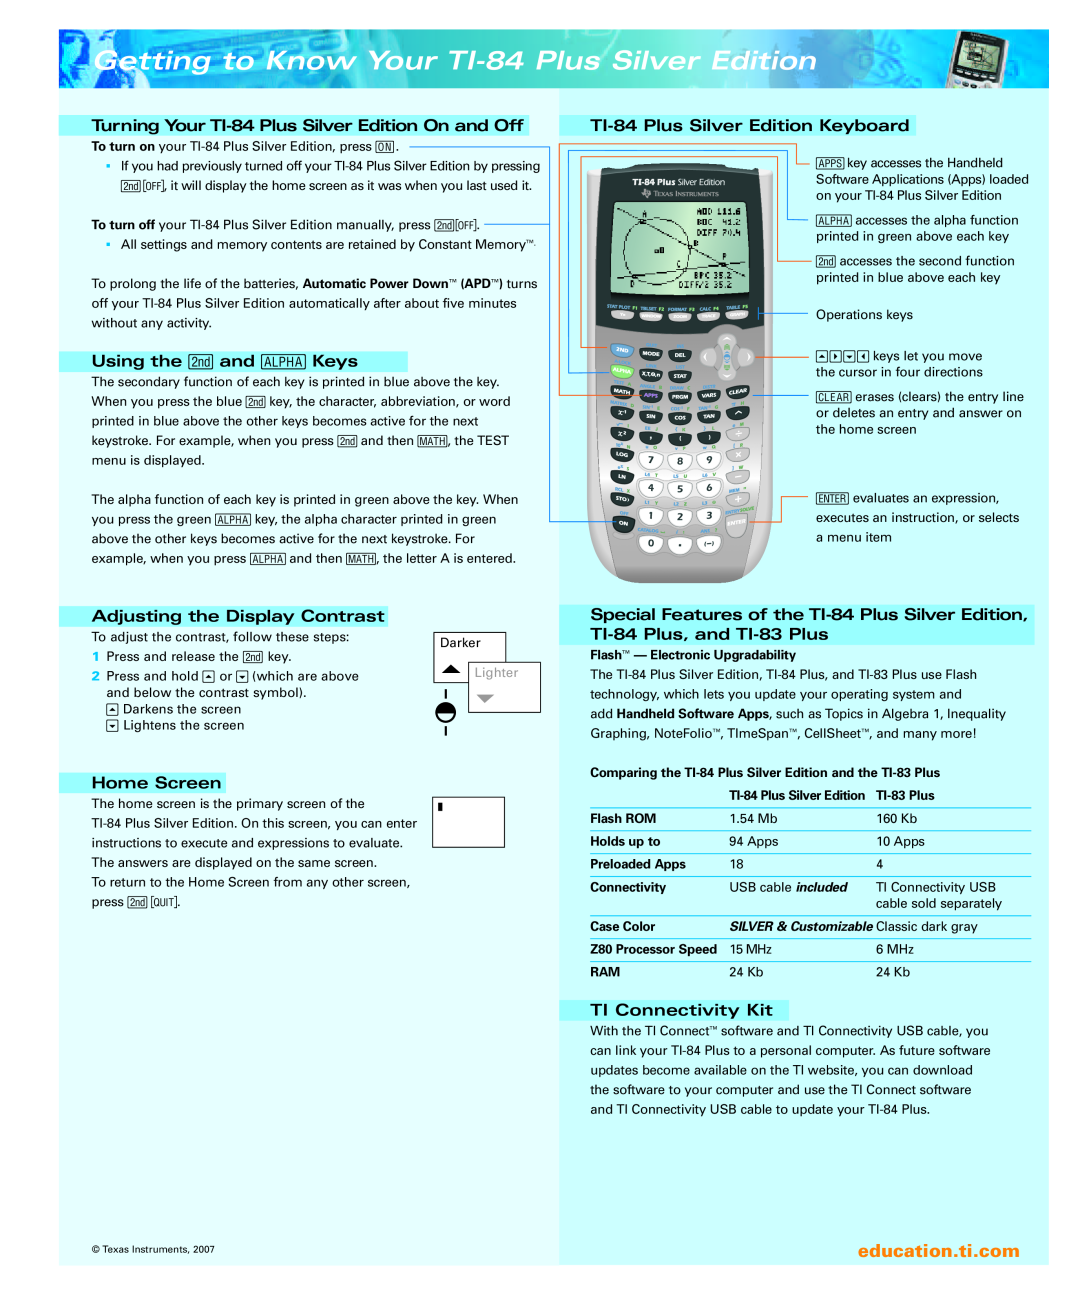 Texas Instruments manual Getting to Know Your TI-84 Plus Silver Edition, education.ti.com, Using the yand ÉKeys 